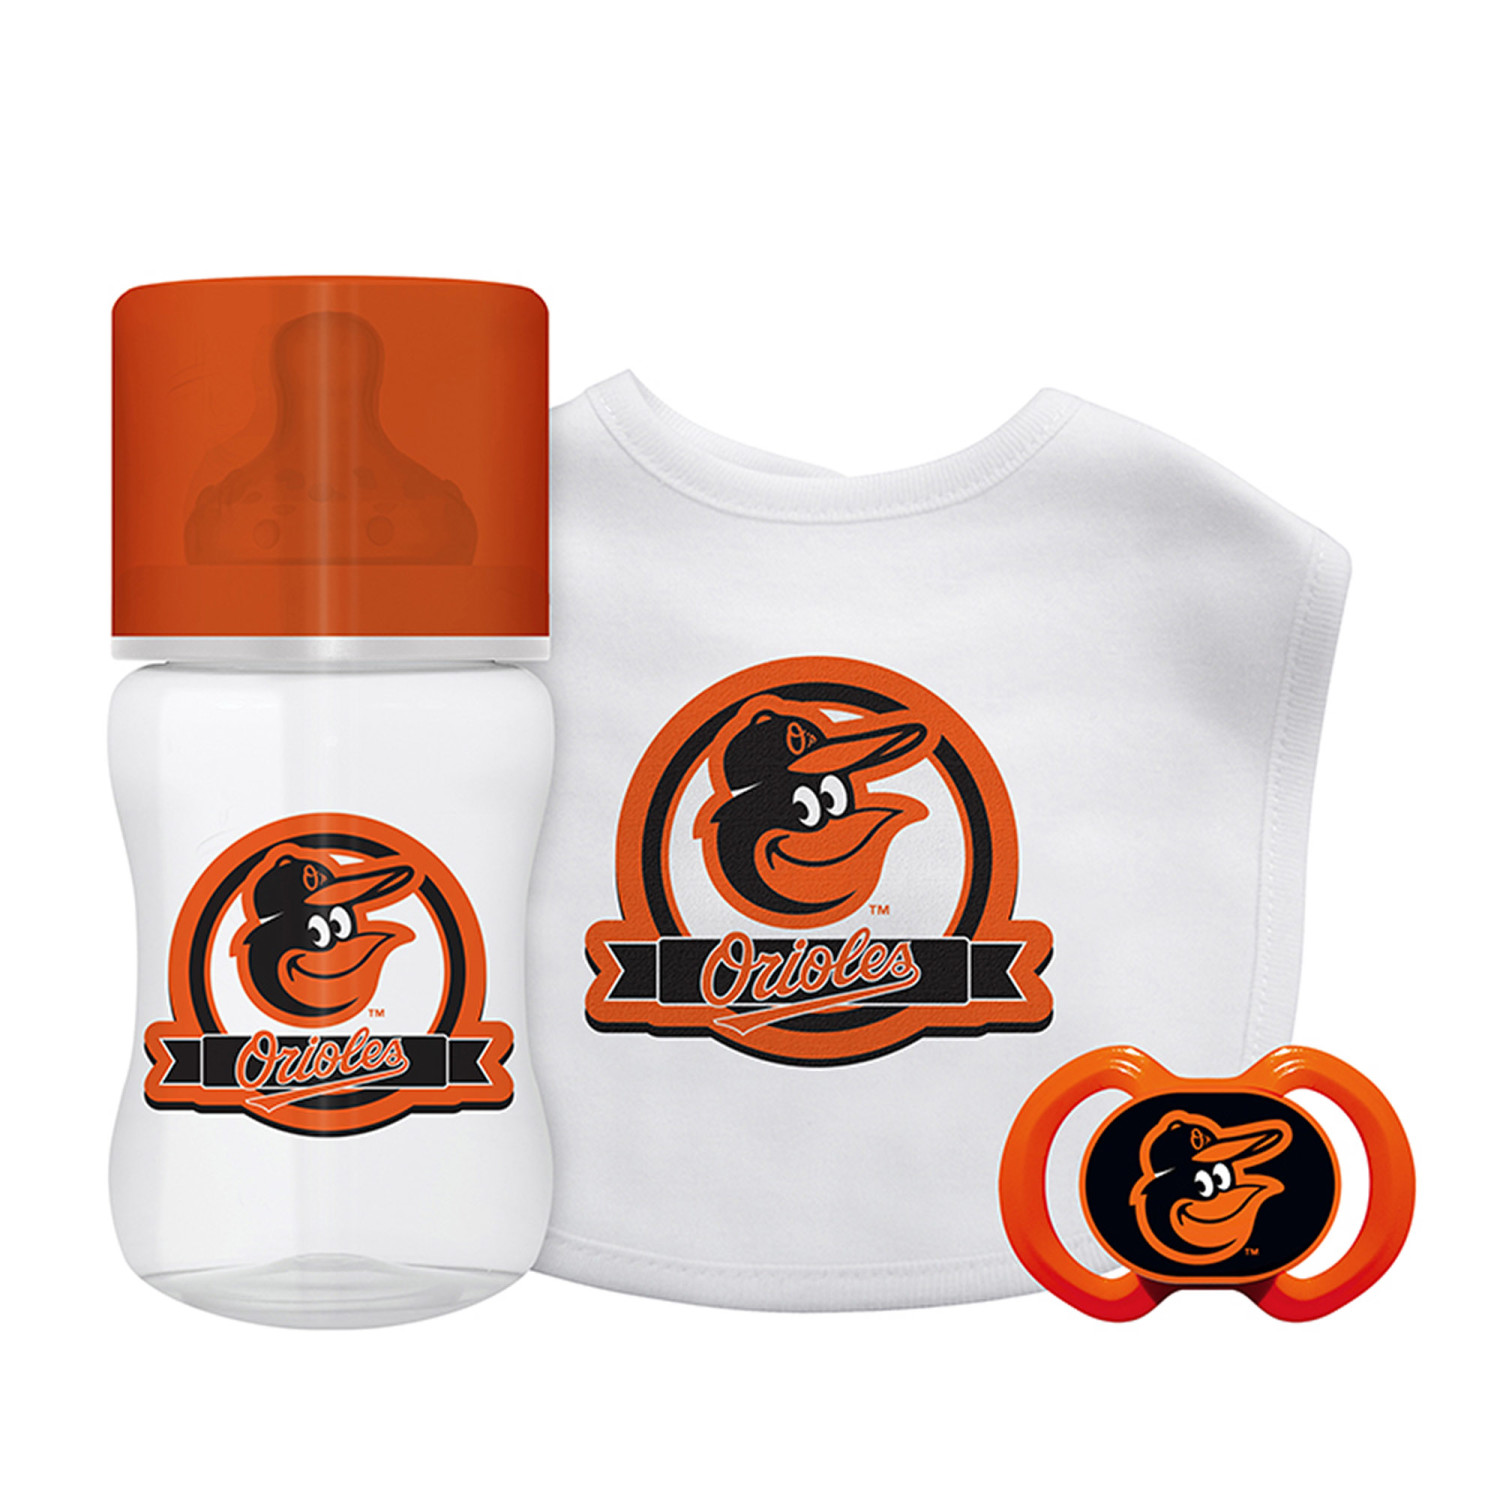 BabyFanatic Officially Licensed 3 Piece Unisex Gift Set - MLB Baltimore Orioles - image 2 of 4